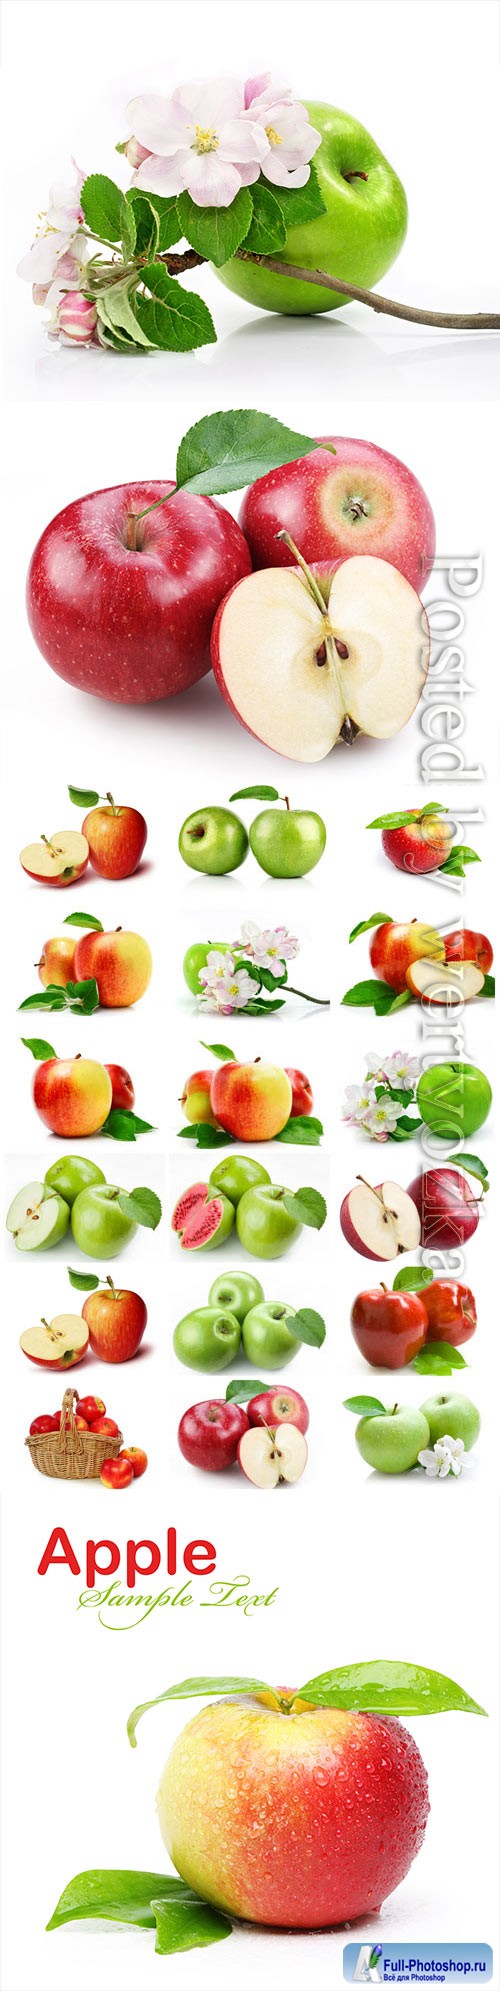 Red and green apples and apple blossom stock photo